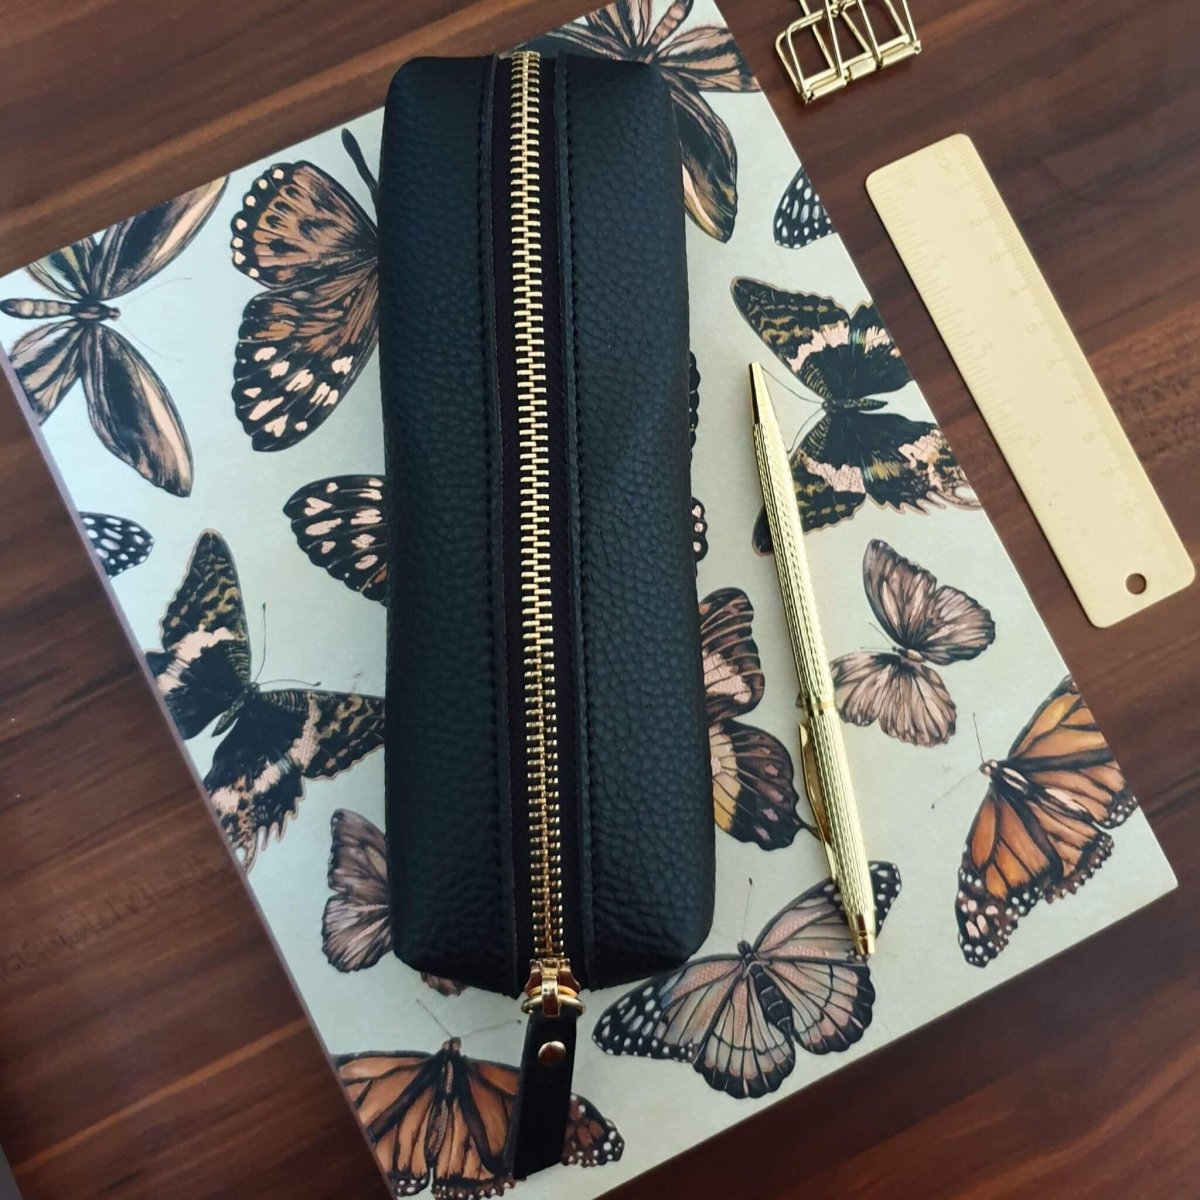 butterfly notebook with black pencil case and gold pen on top.